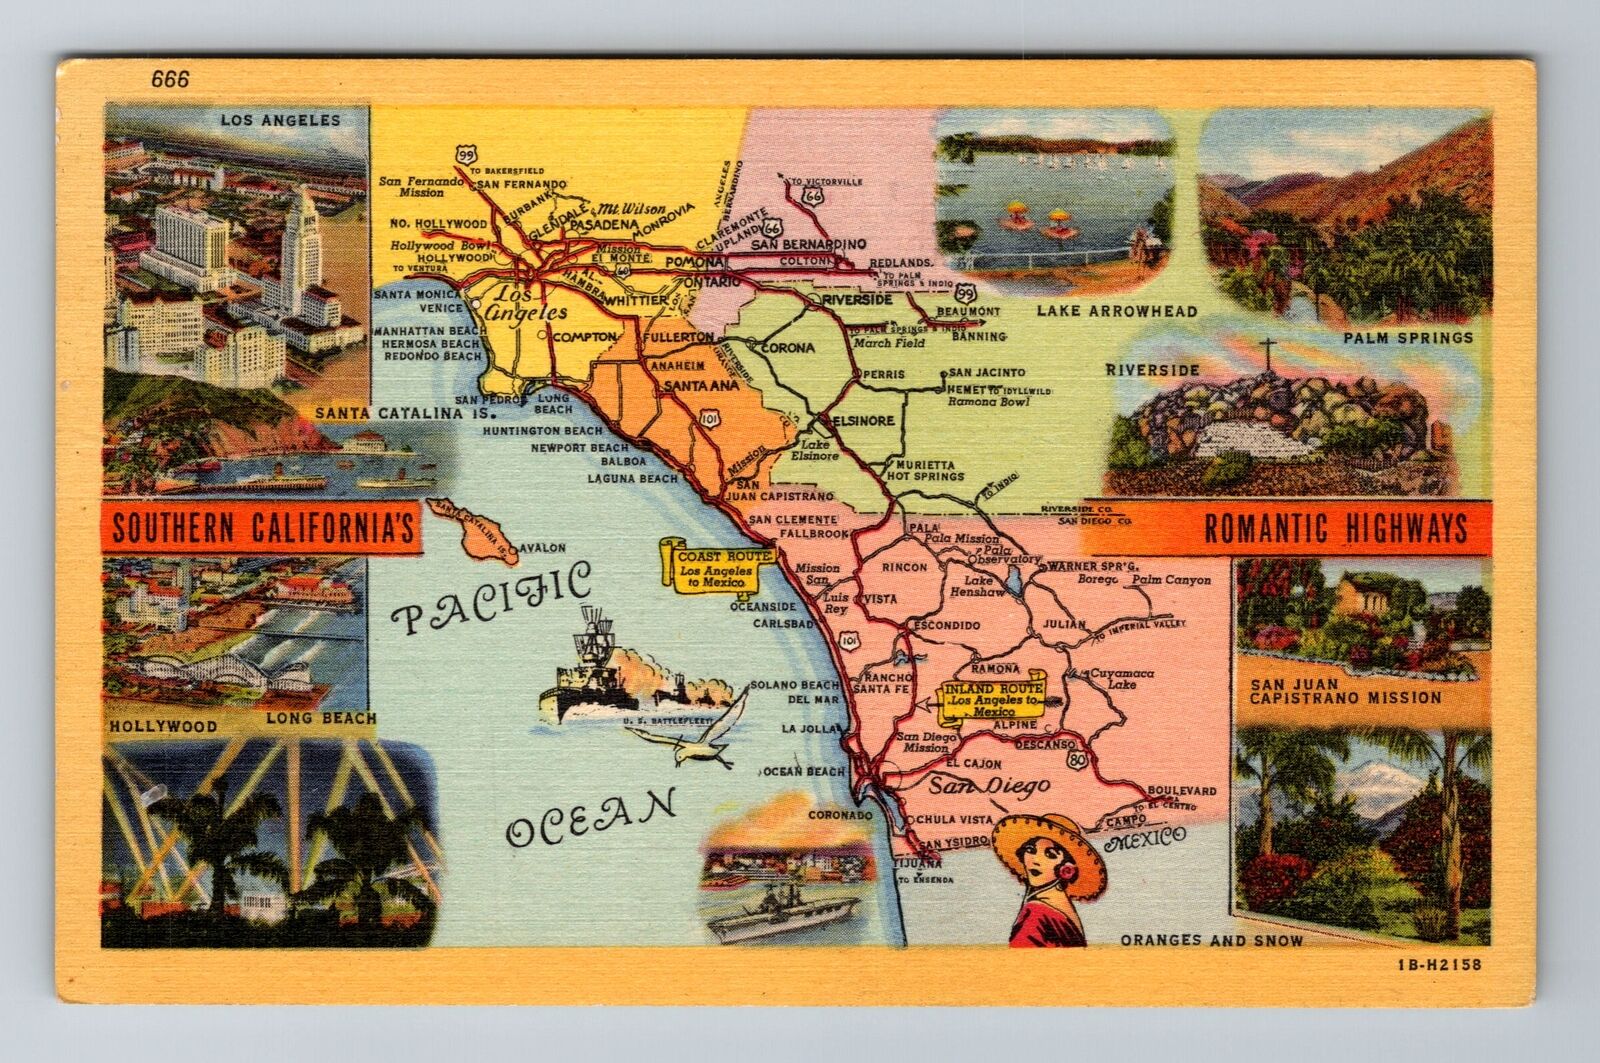 Southern California's Romantic Highways Map, Vintage Postcard